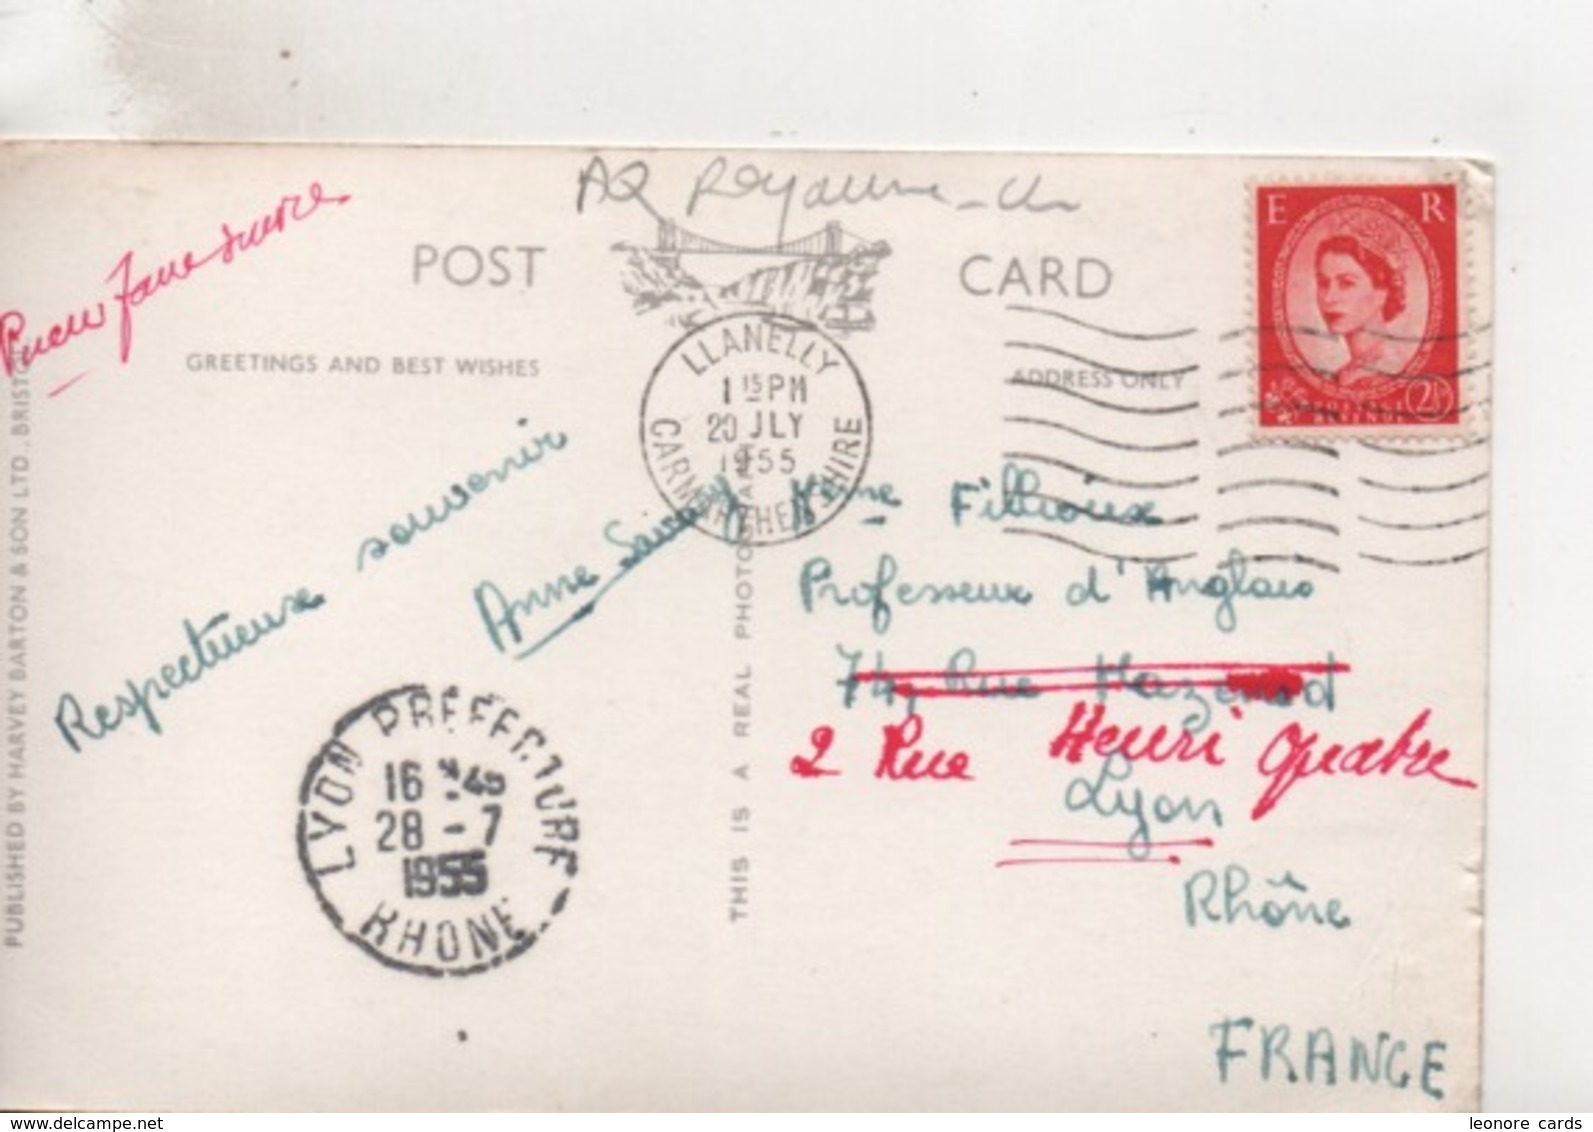 Cpa.Royaume-Uni.Pays De Galles.Llanelly.multi-vues.1955 - Monmouthshire